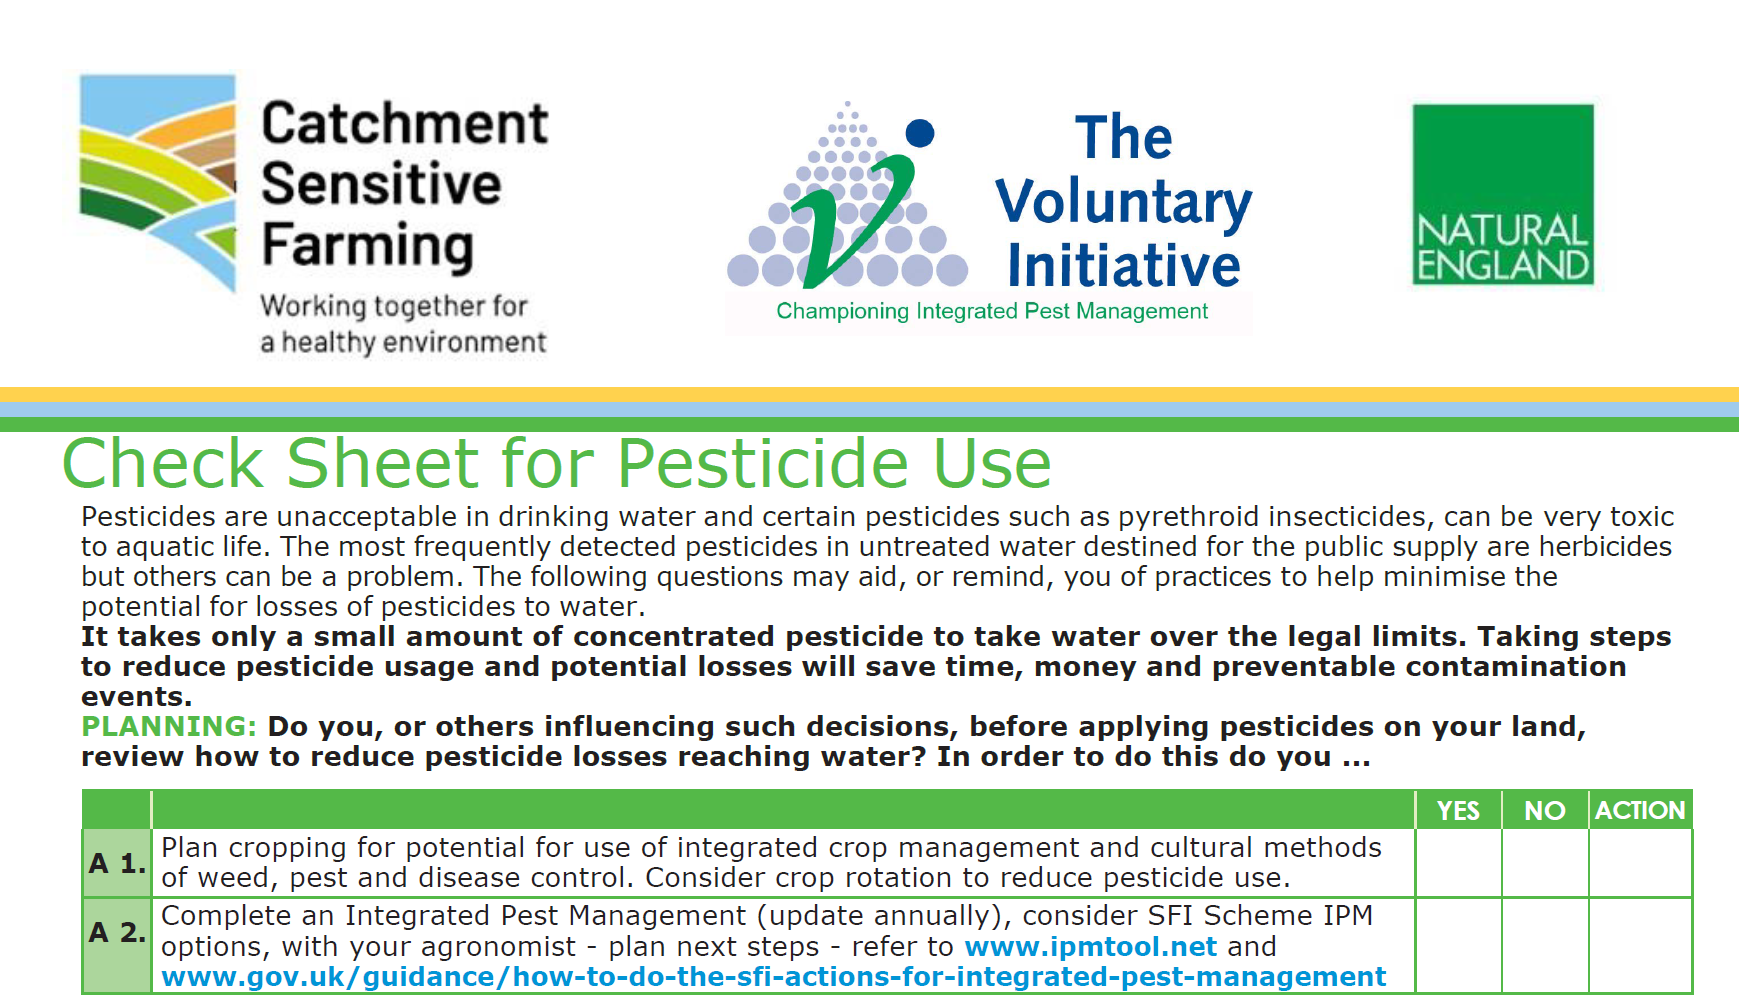 Joint CSF / VI Pesticide Check Sheet launched Image